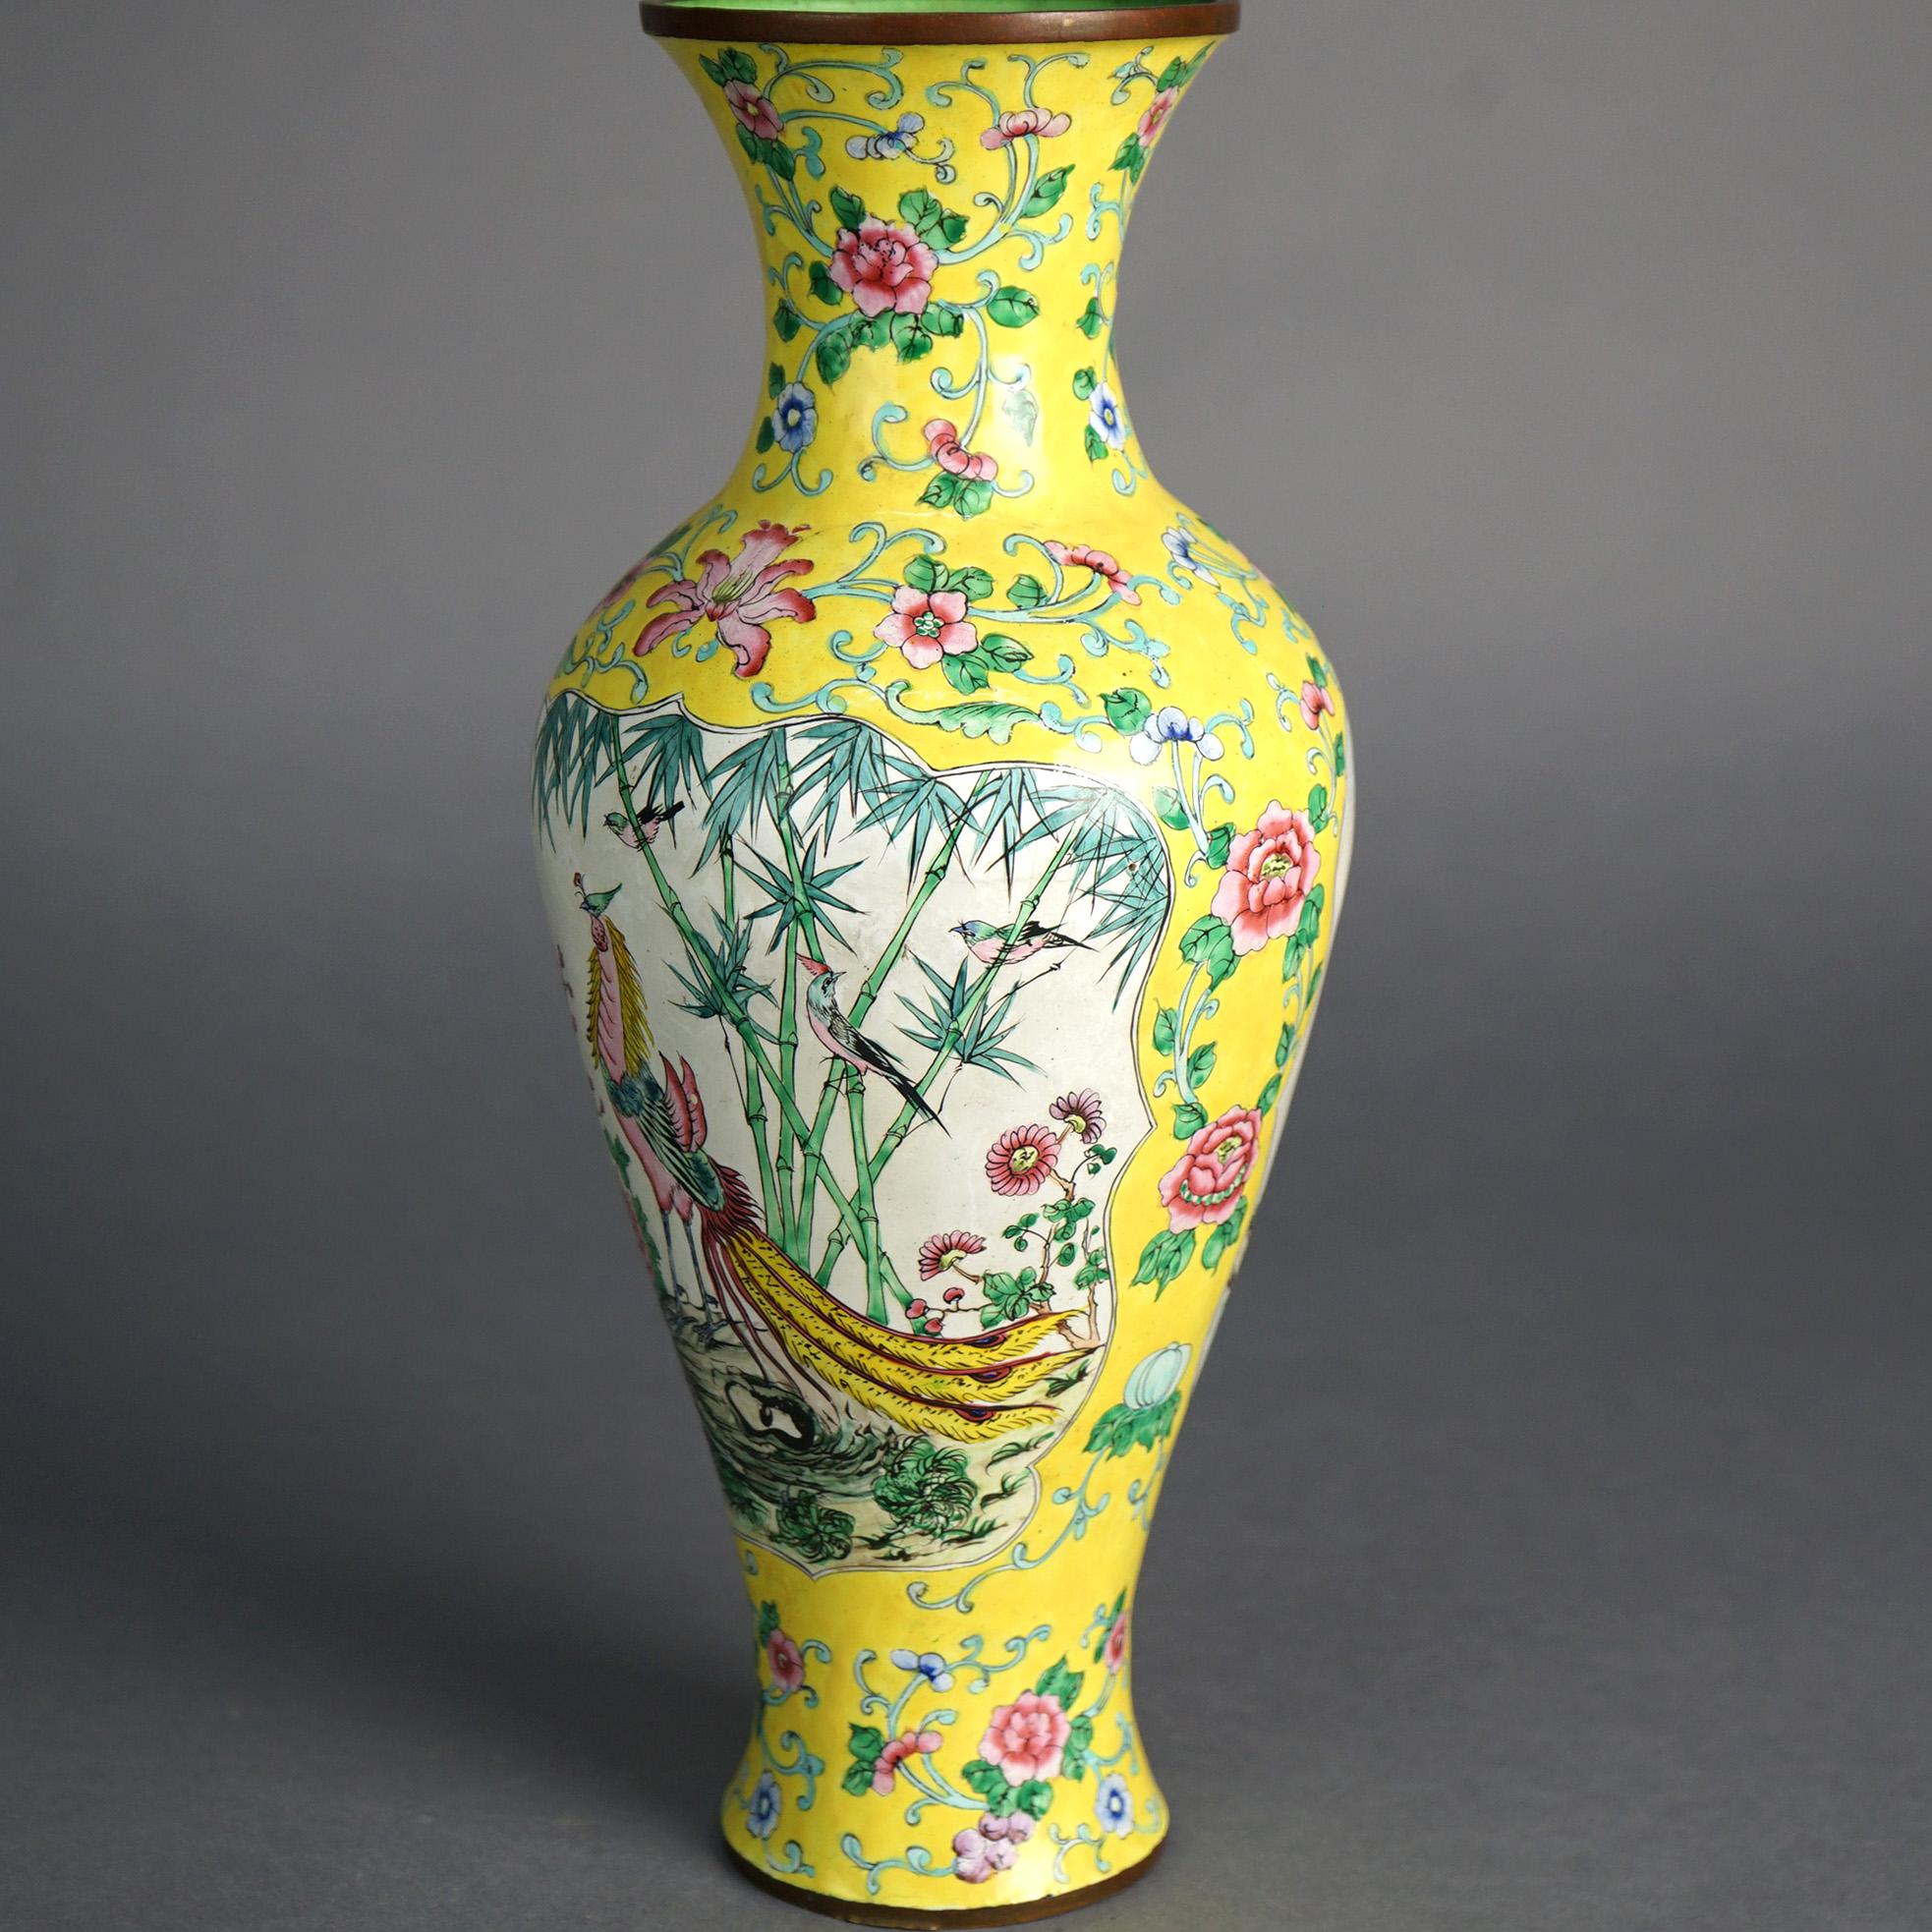 Antique Chinese Enameled Vase with Landscape & Flowers C1930 In Good Condition For Sale In Big Flats, NY